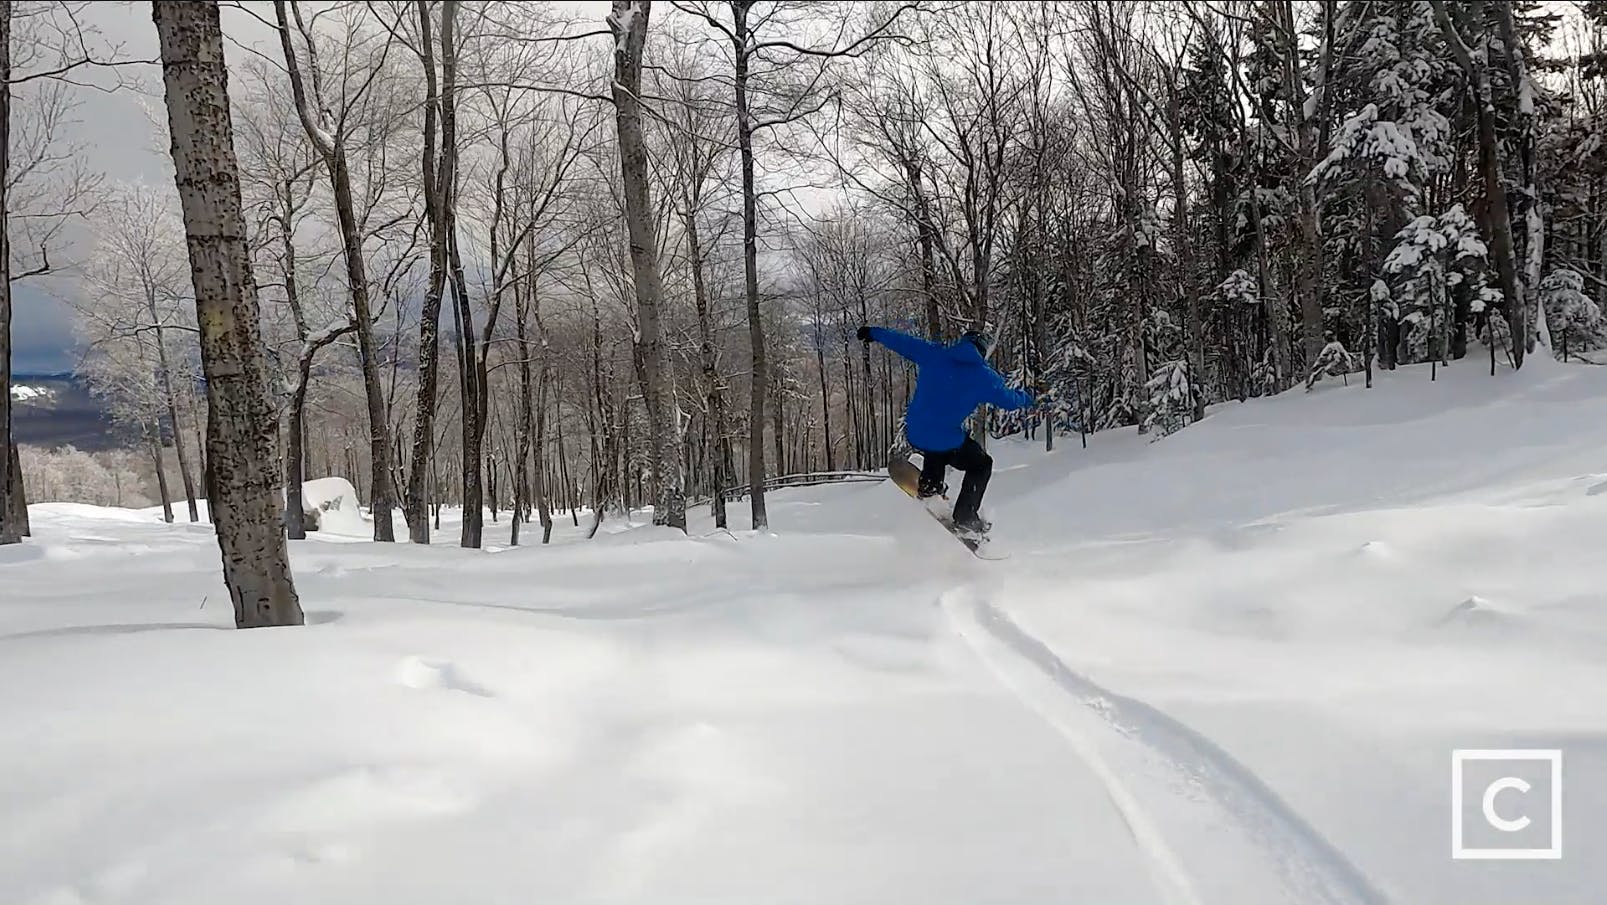 Curated expert Franco DiRienzo jumping up through fresh powder in a forest with the Never Summer Harpoon snowboard